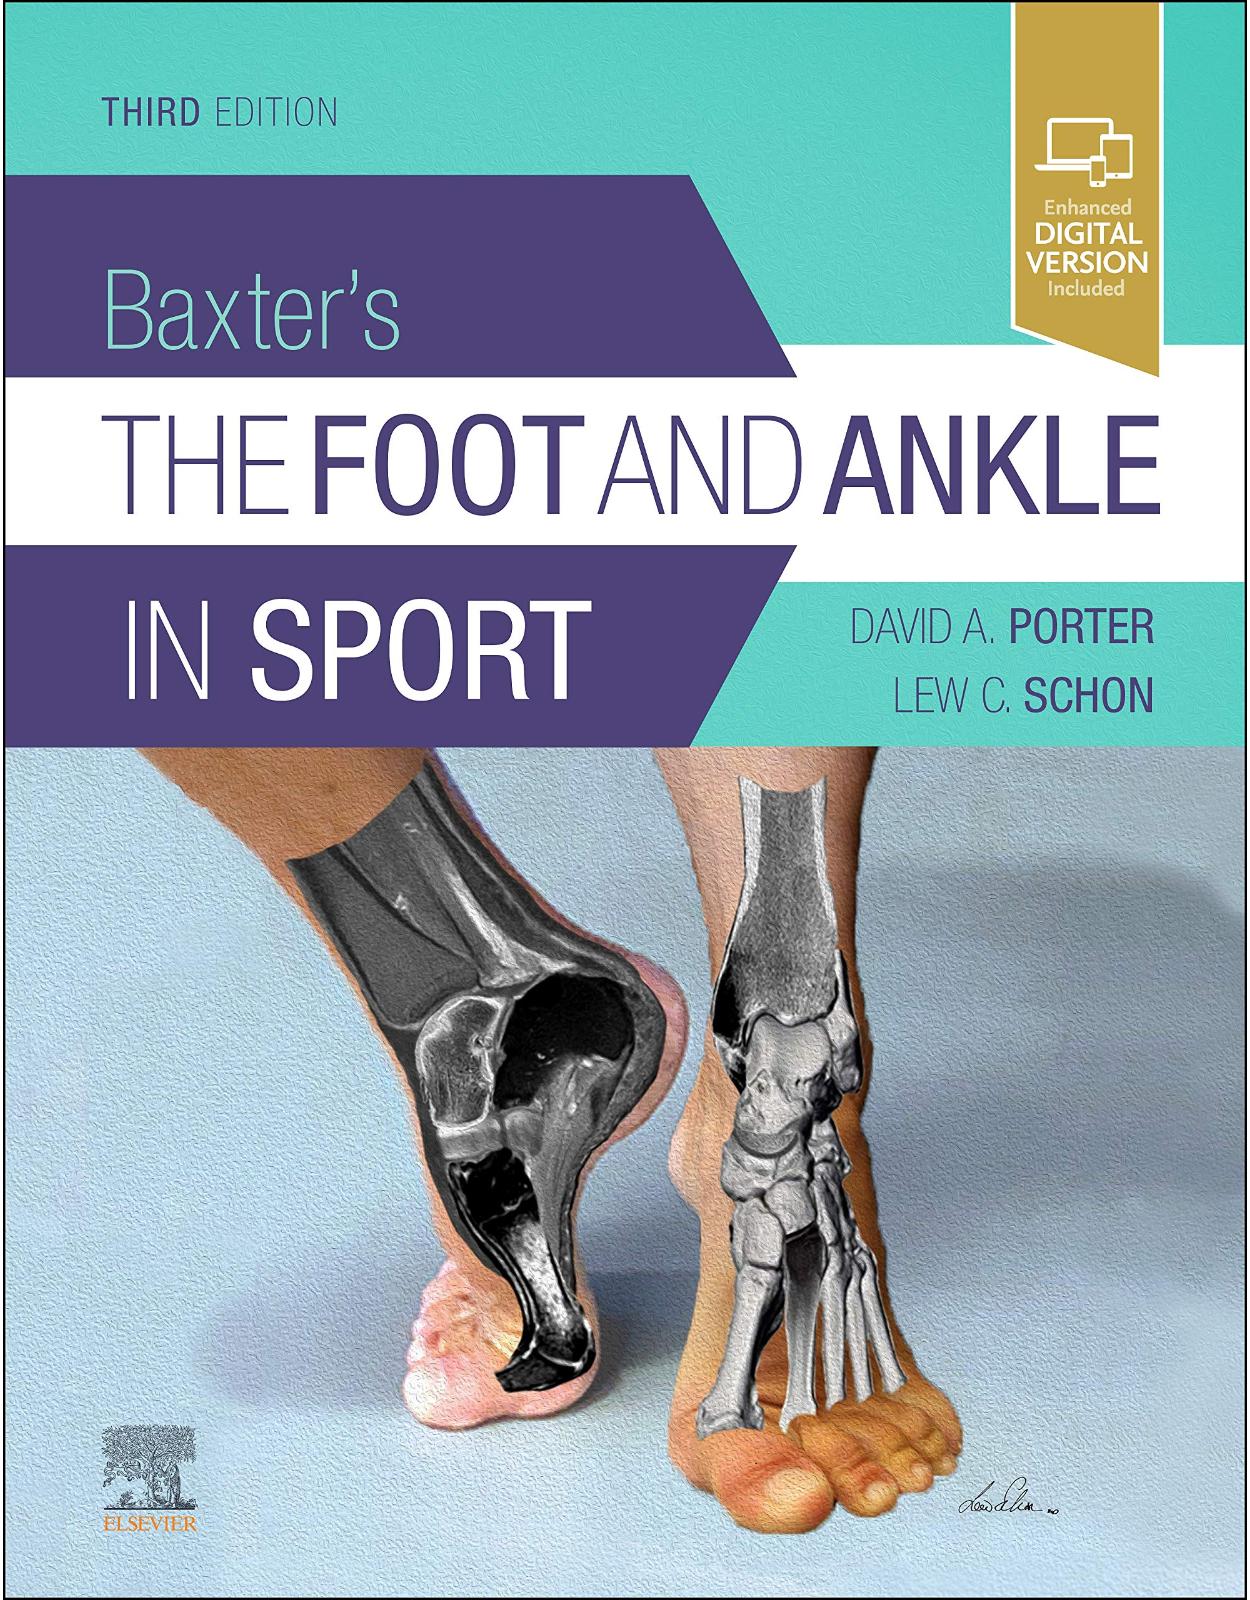 Baxter's The Foot And Ankle In Sport, 3rd Edition